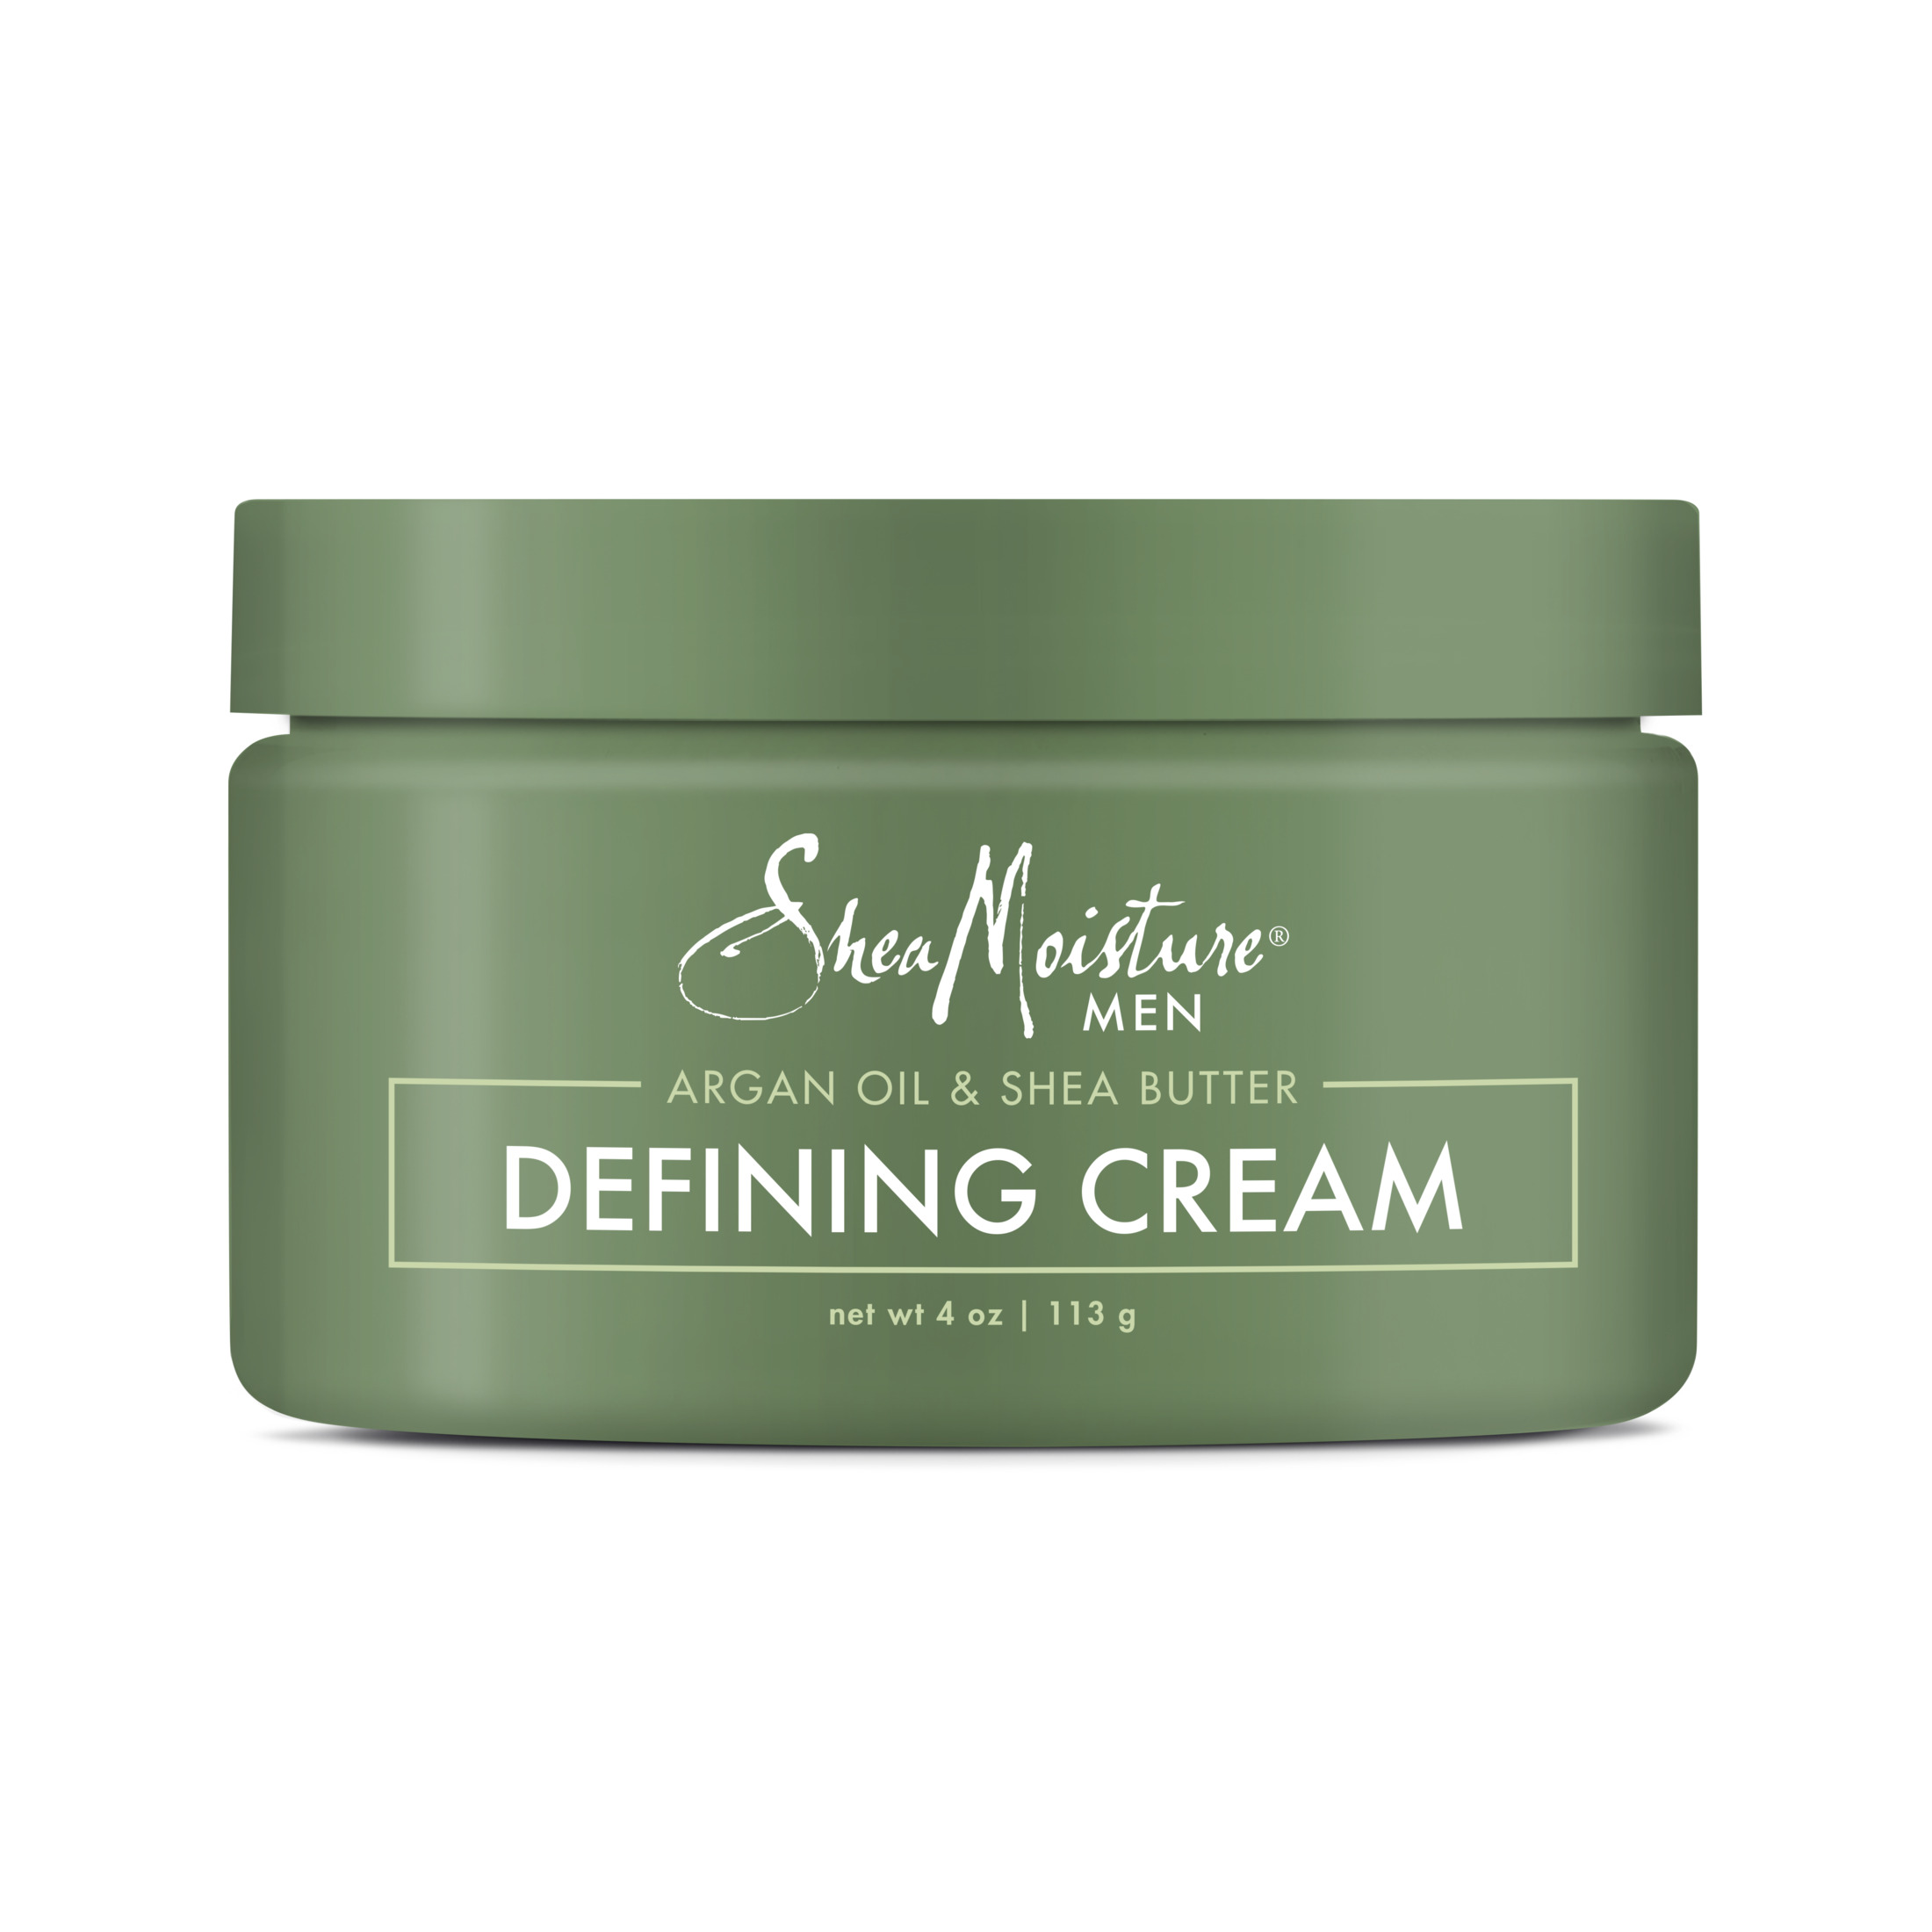 SheaMoisture Men's Defining Hair Cream Argan Oil and Shea for Curly Hair with Shea Butter 4 oz - image 1 of 9